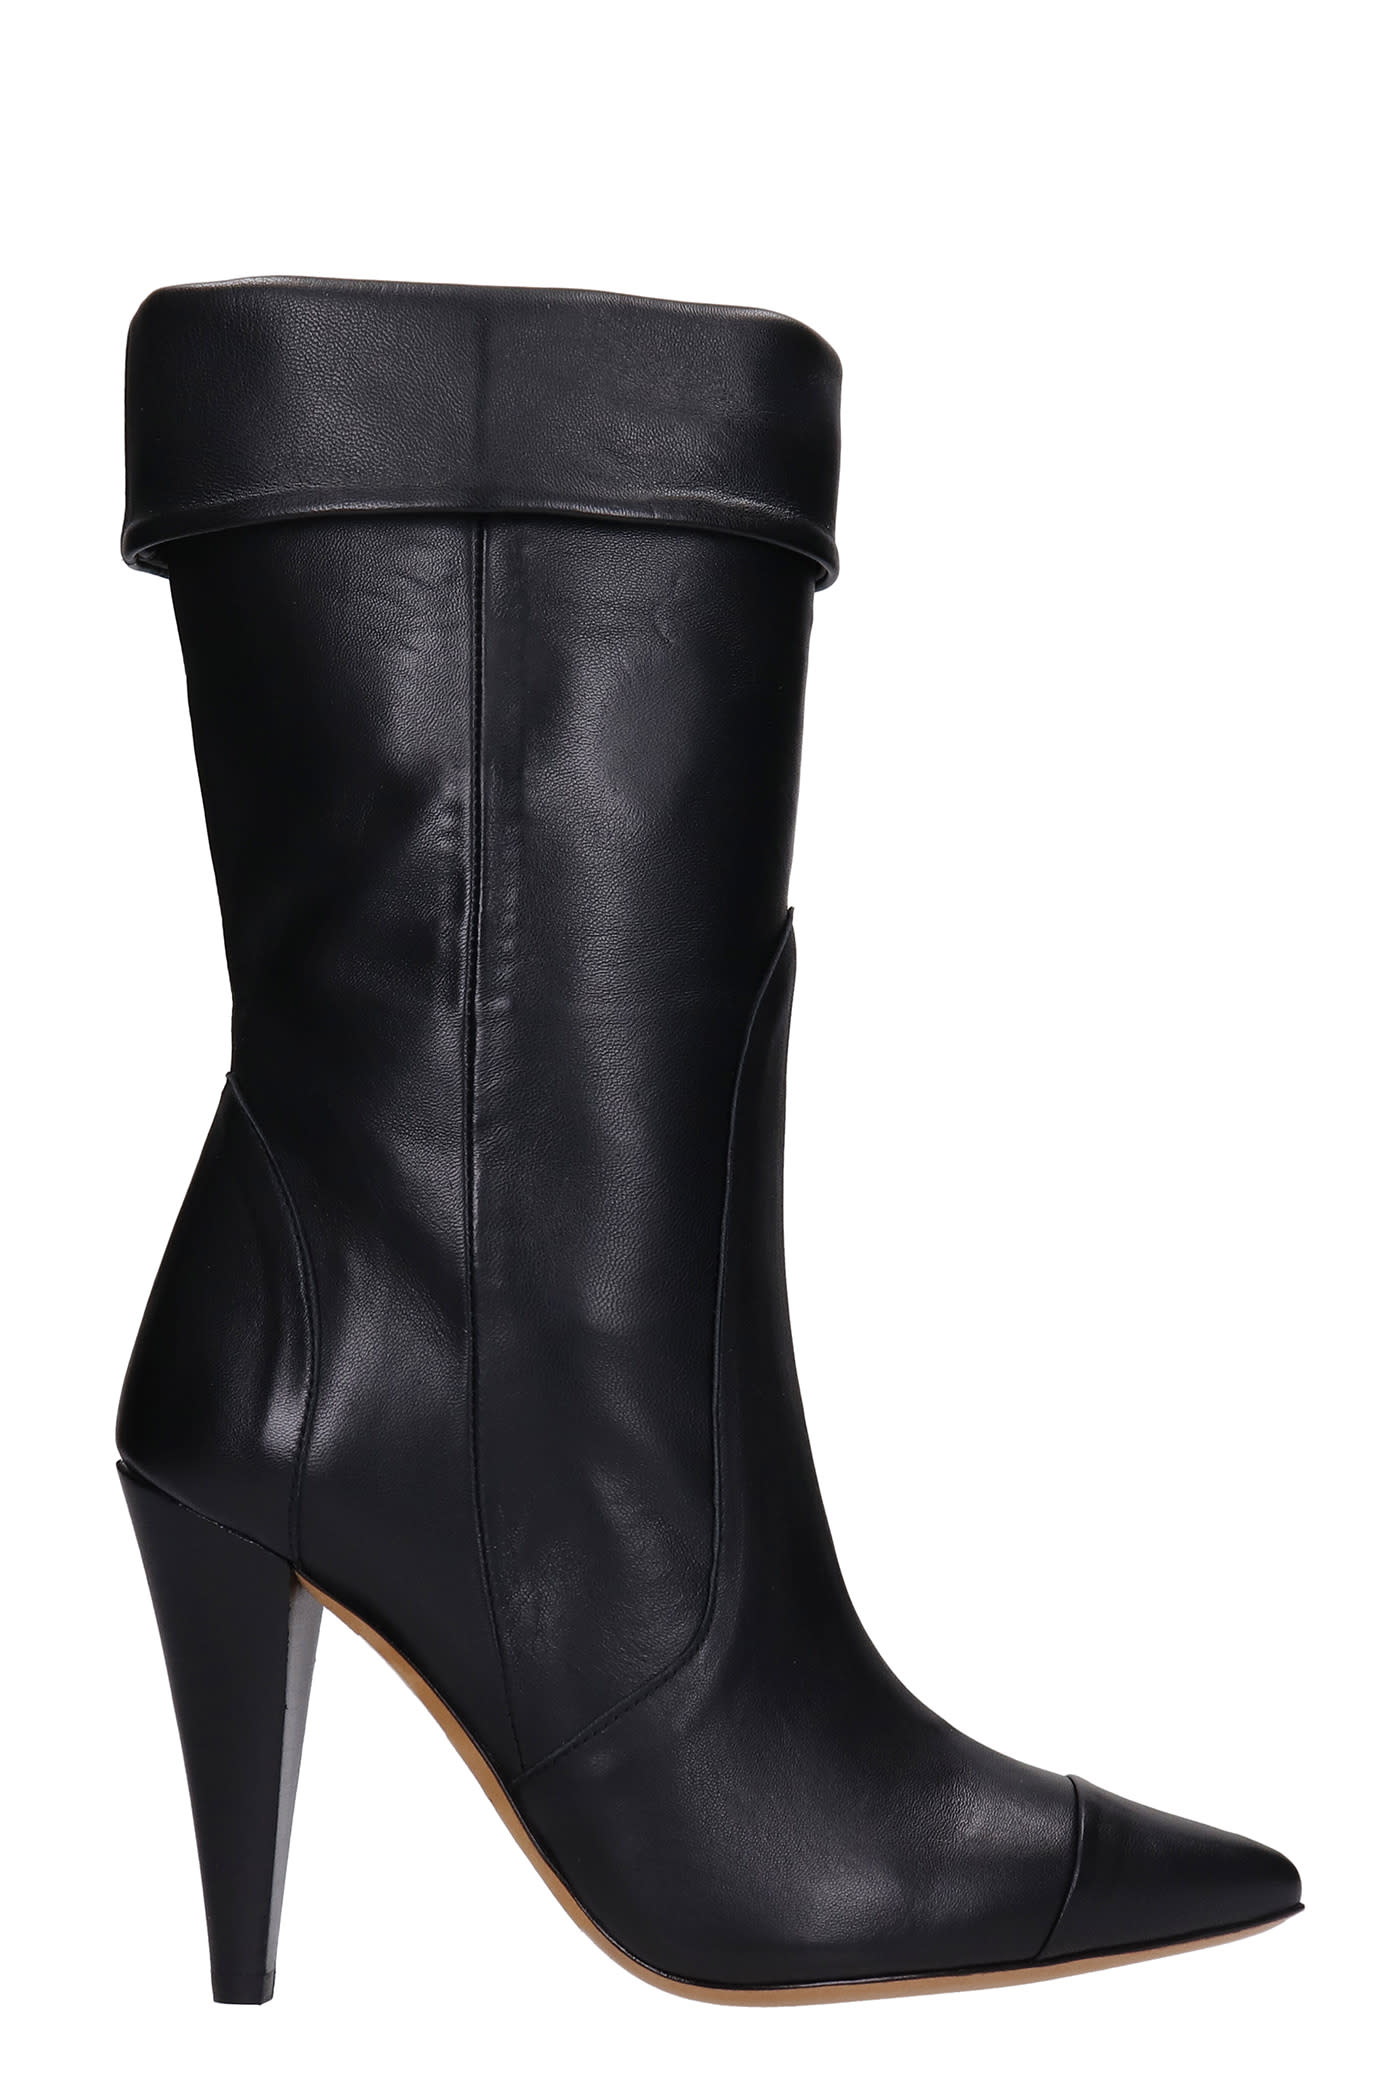 IRO Ussel High Heels Ankle Boots In Black Leather